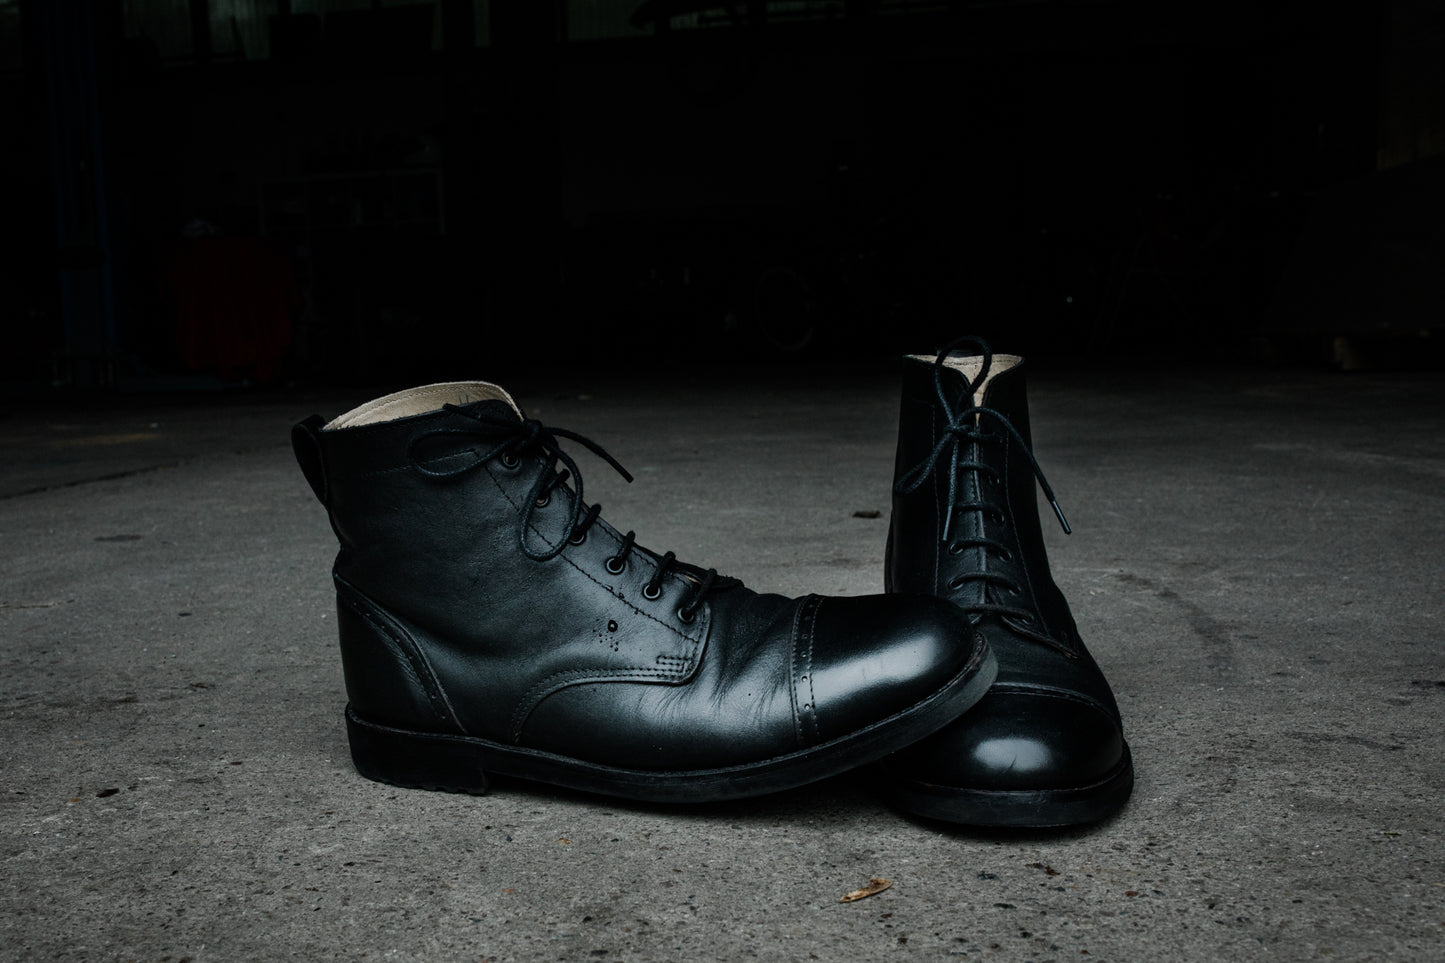 Tejo Black Boots - OldMulla - Boots Store, Handmade By George Family